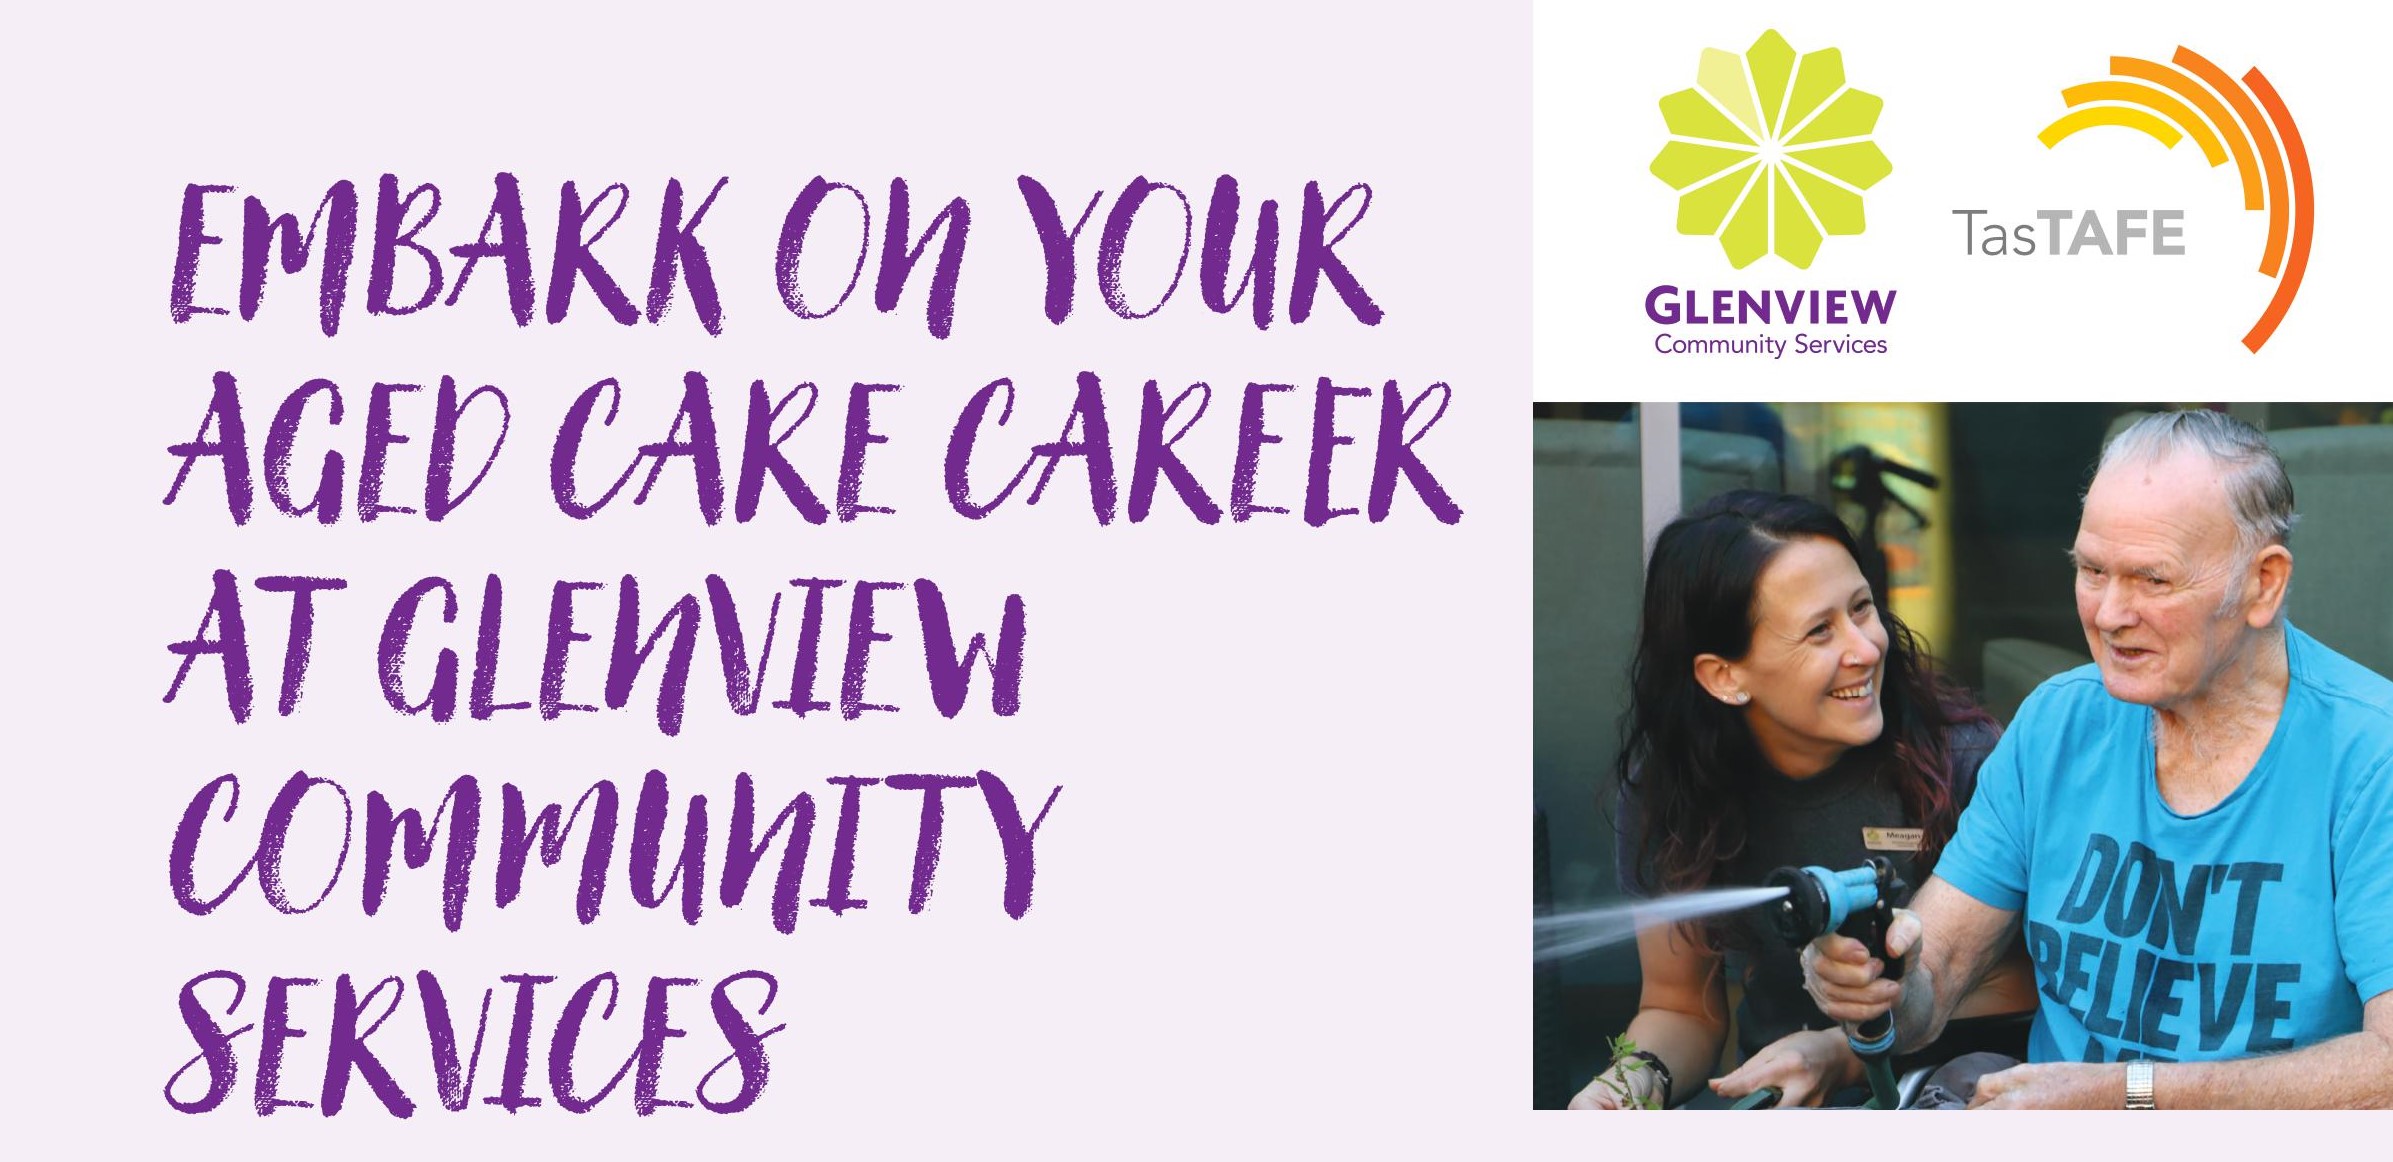 Embark on your aged care career at Glenview